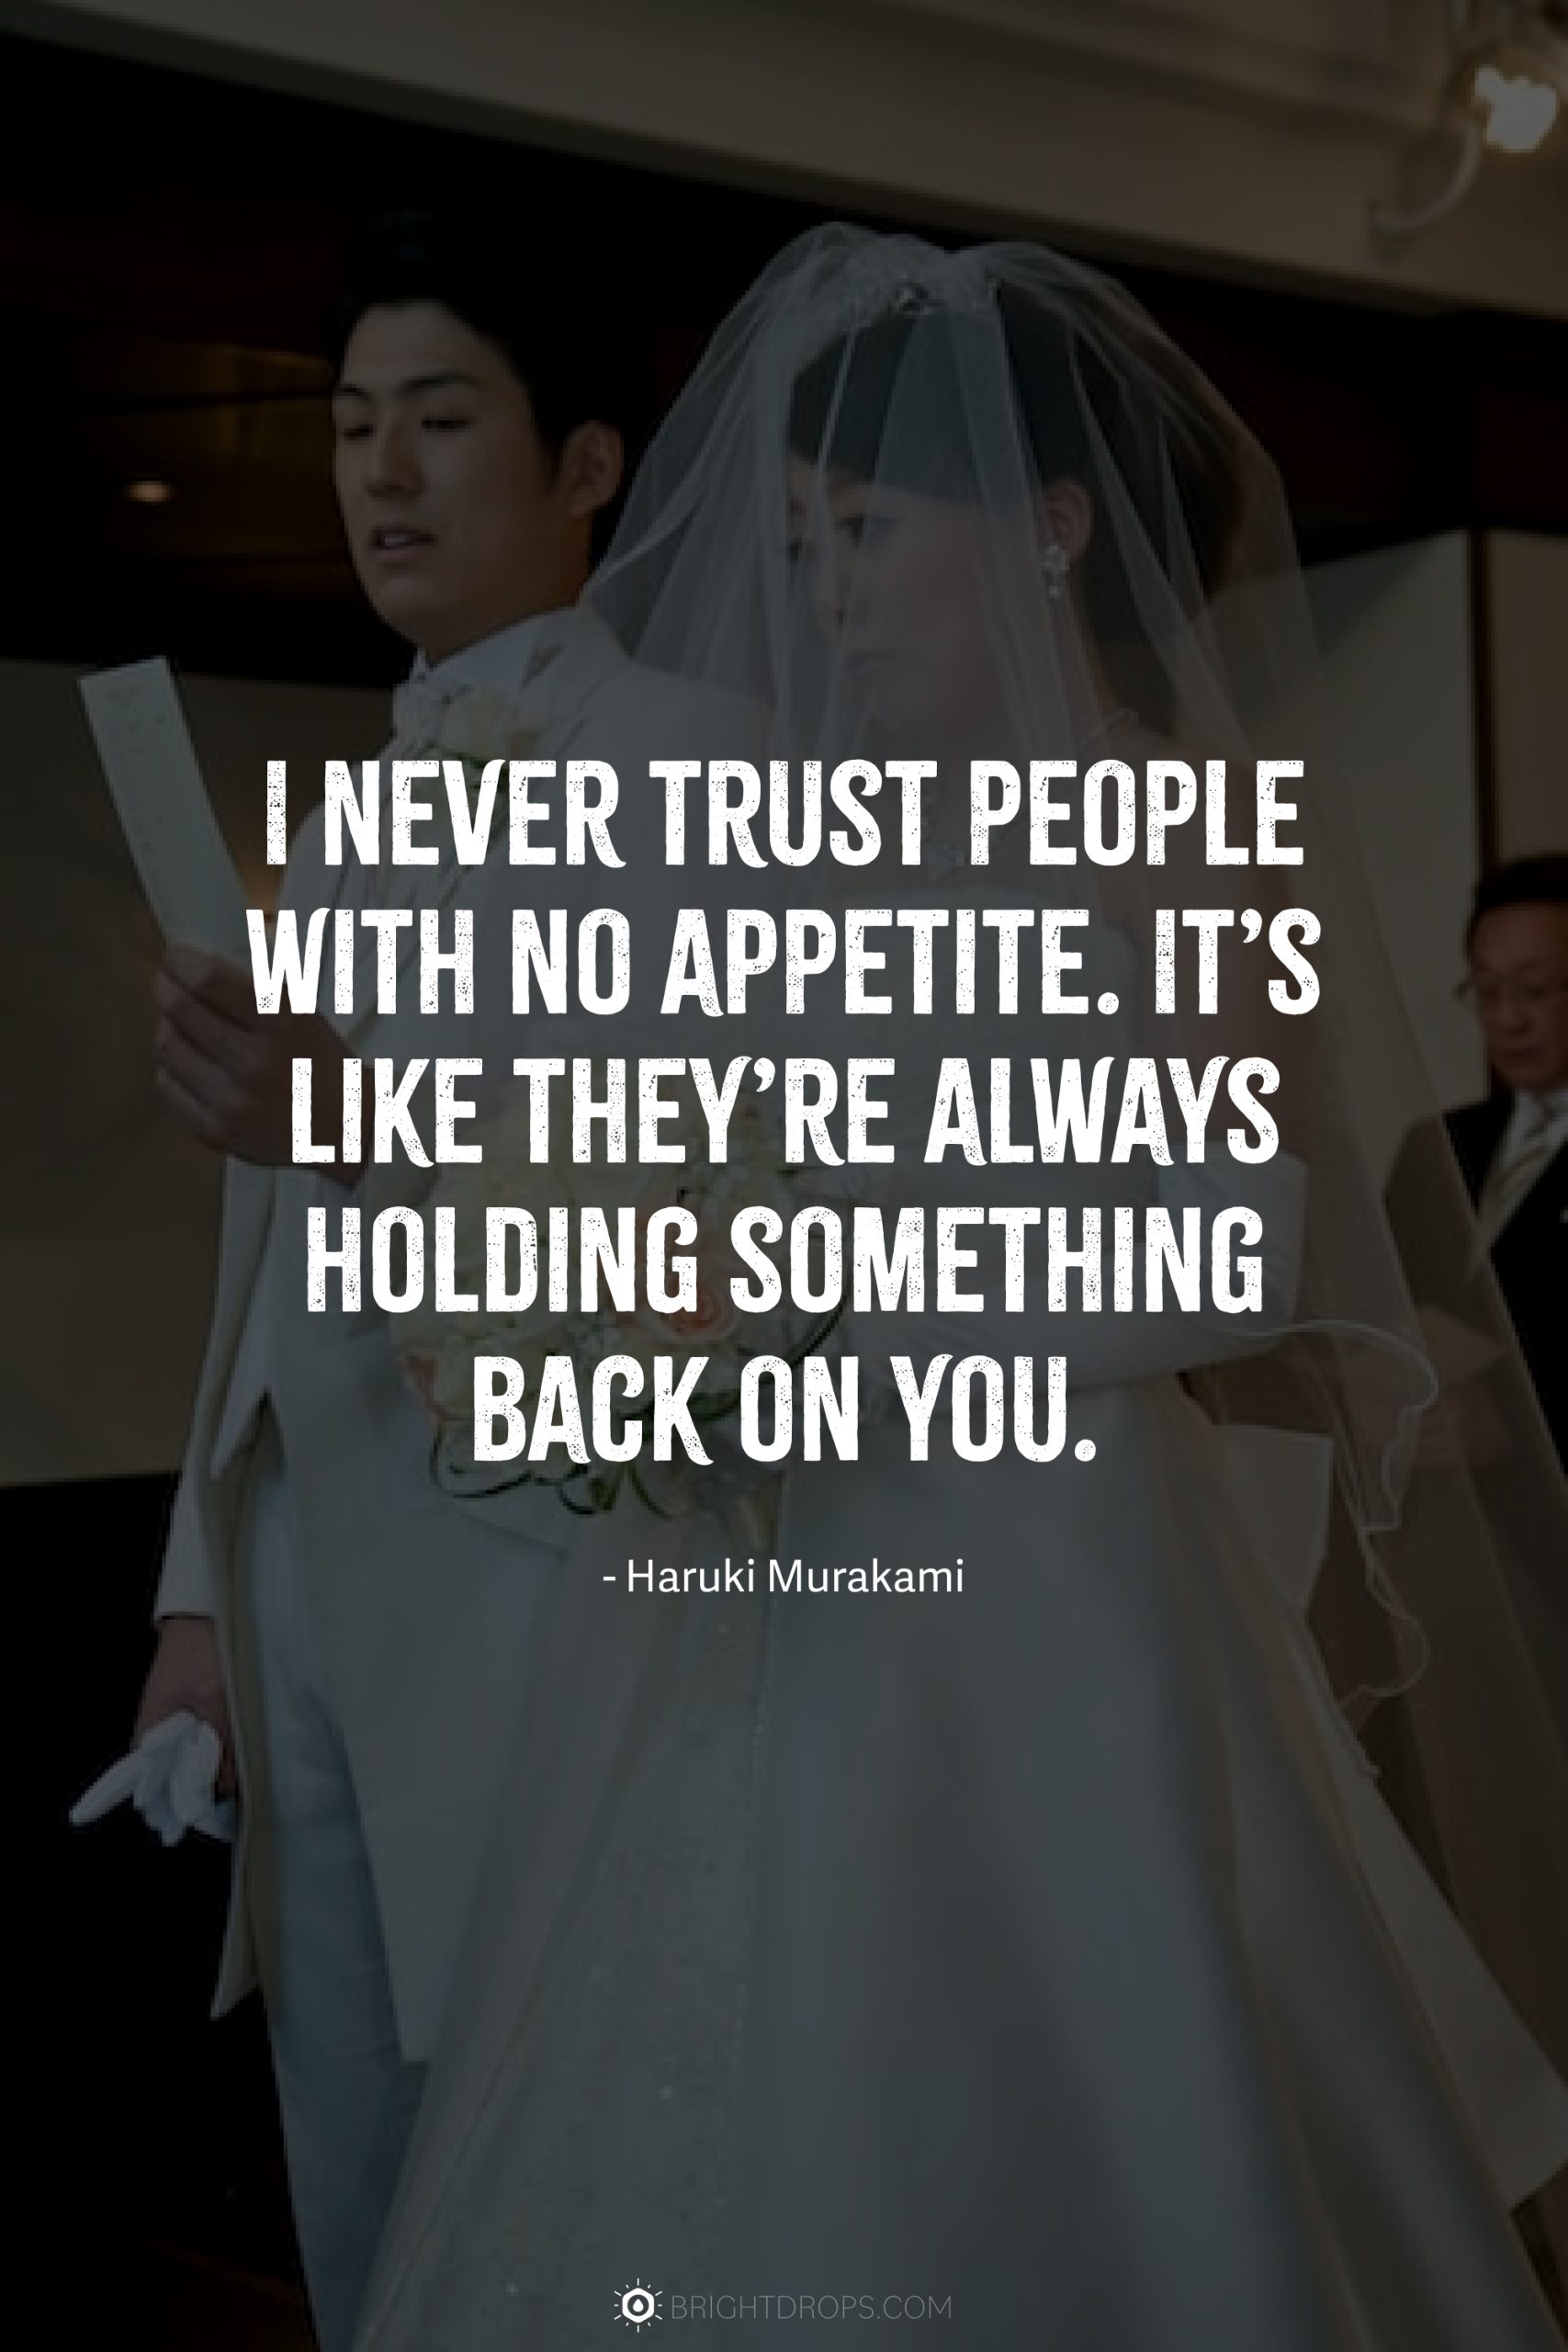 I never trust people with no appetite. It’s like they’re always holding something back on you.